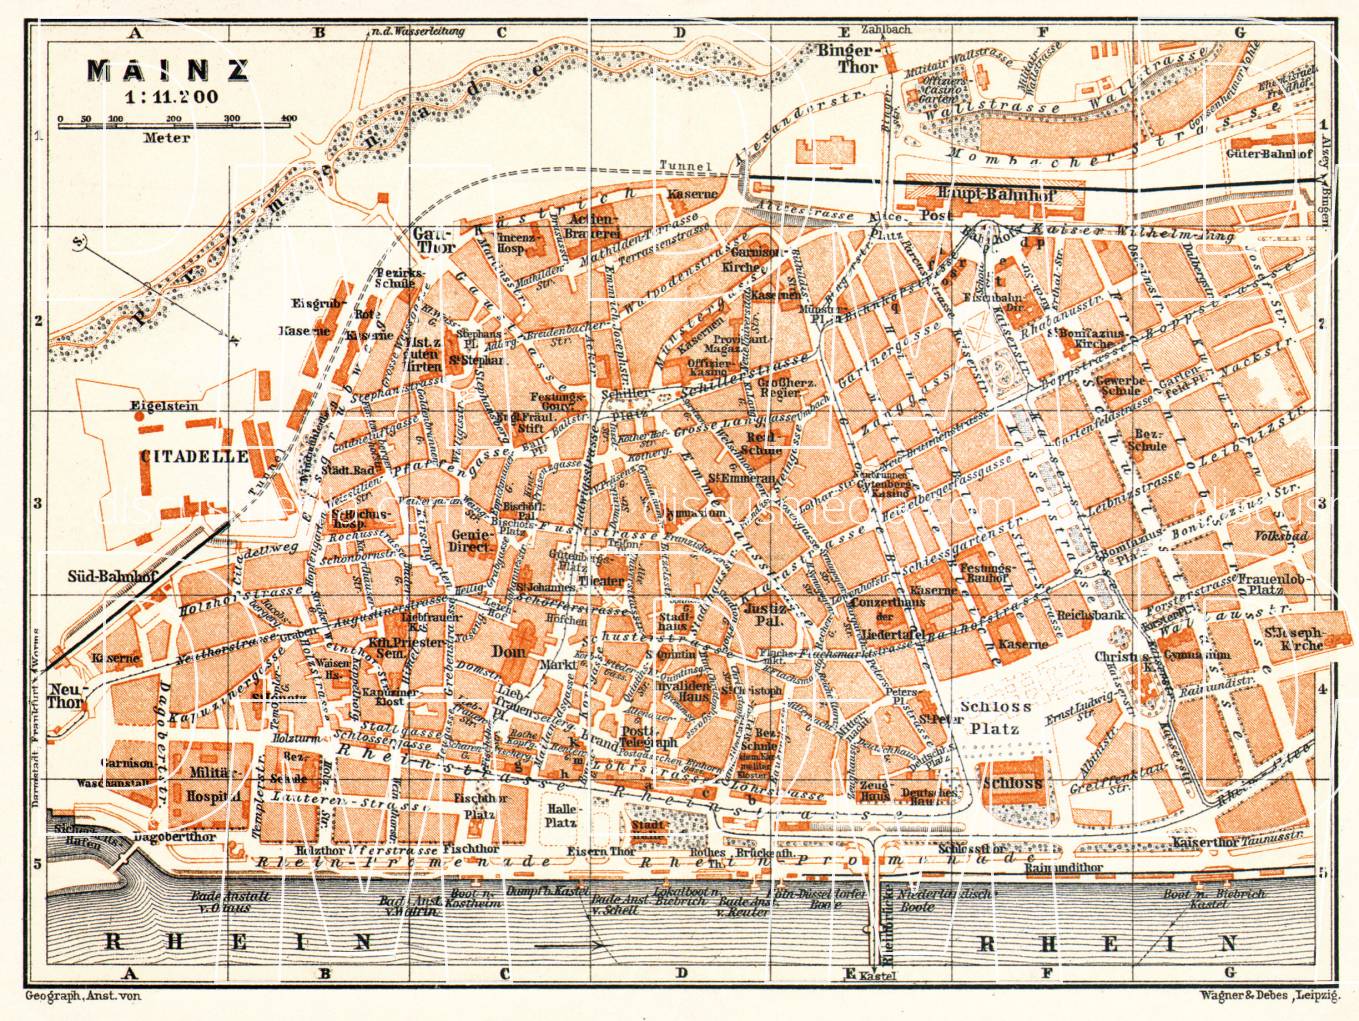 Old map of Mainz in 1906. Buy vintage map replica poster print or